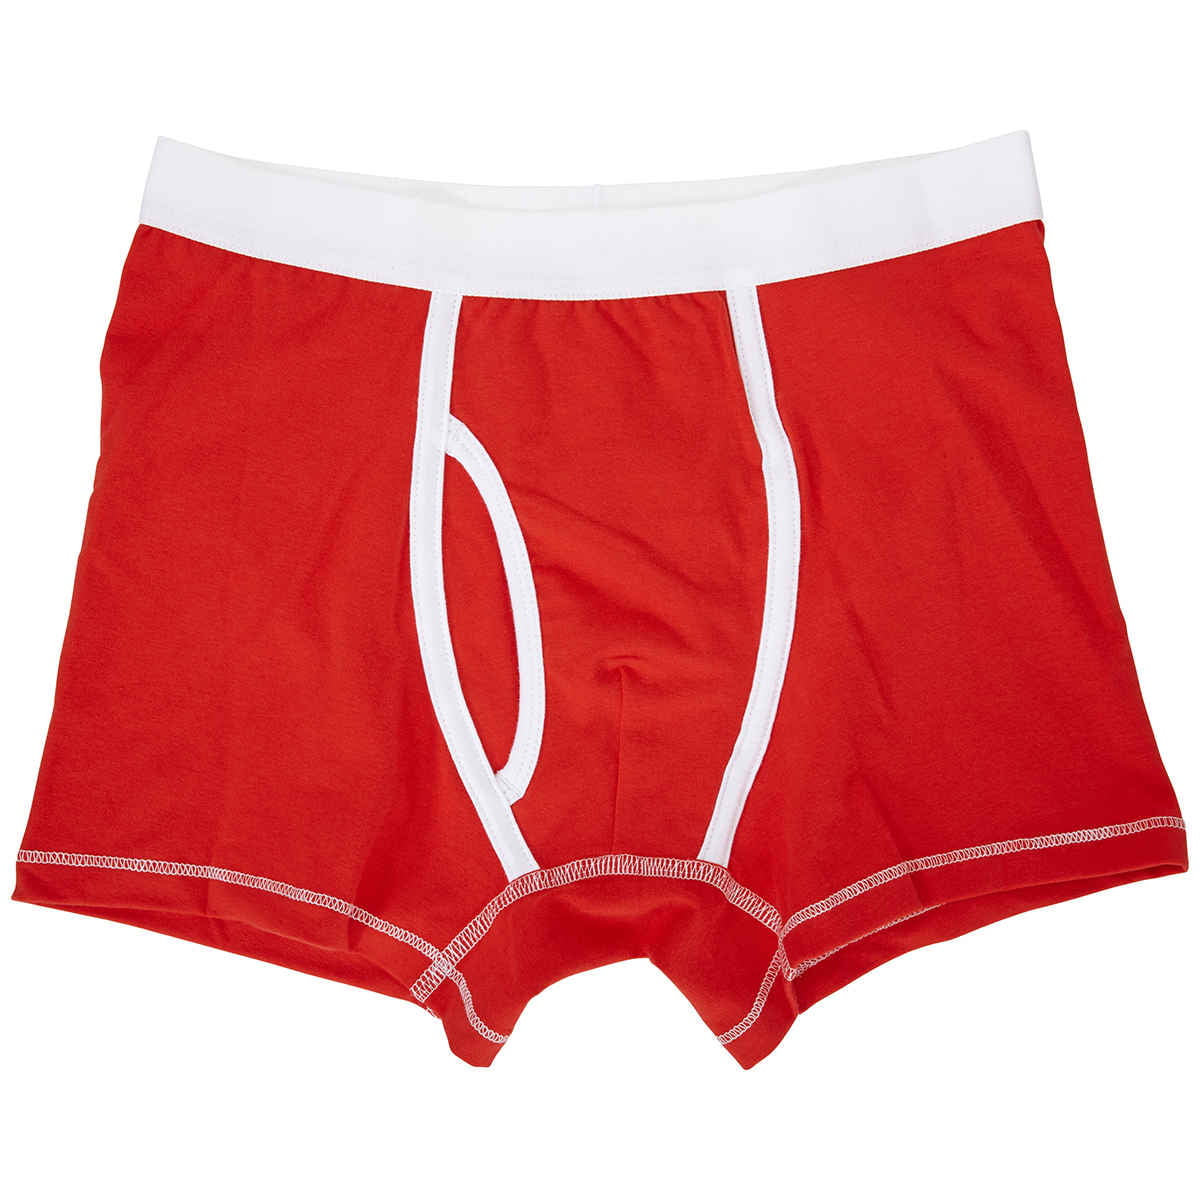 Boxer Briefs or Compression Shorts Cornell University Big Red Boxers 